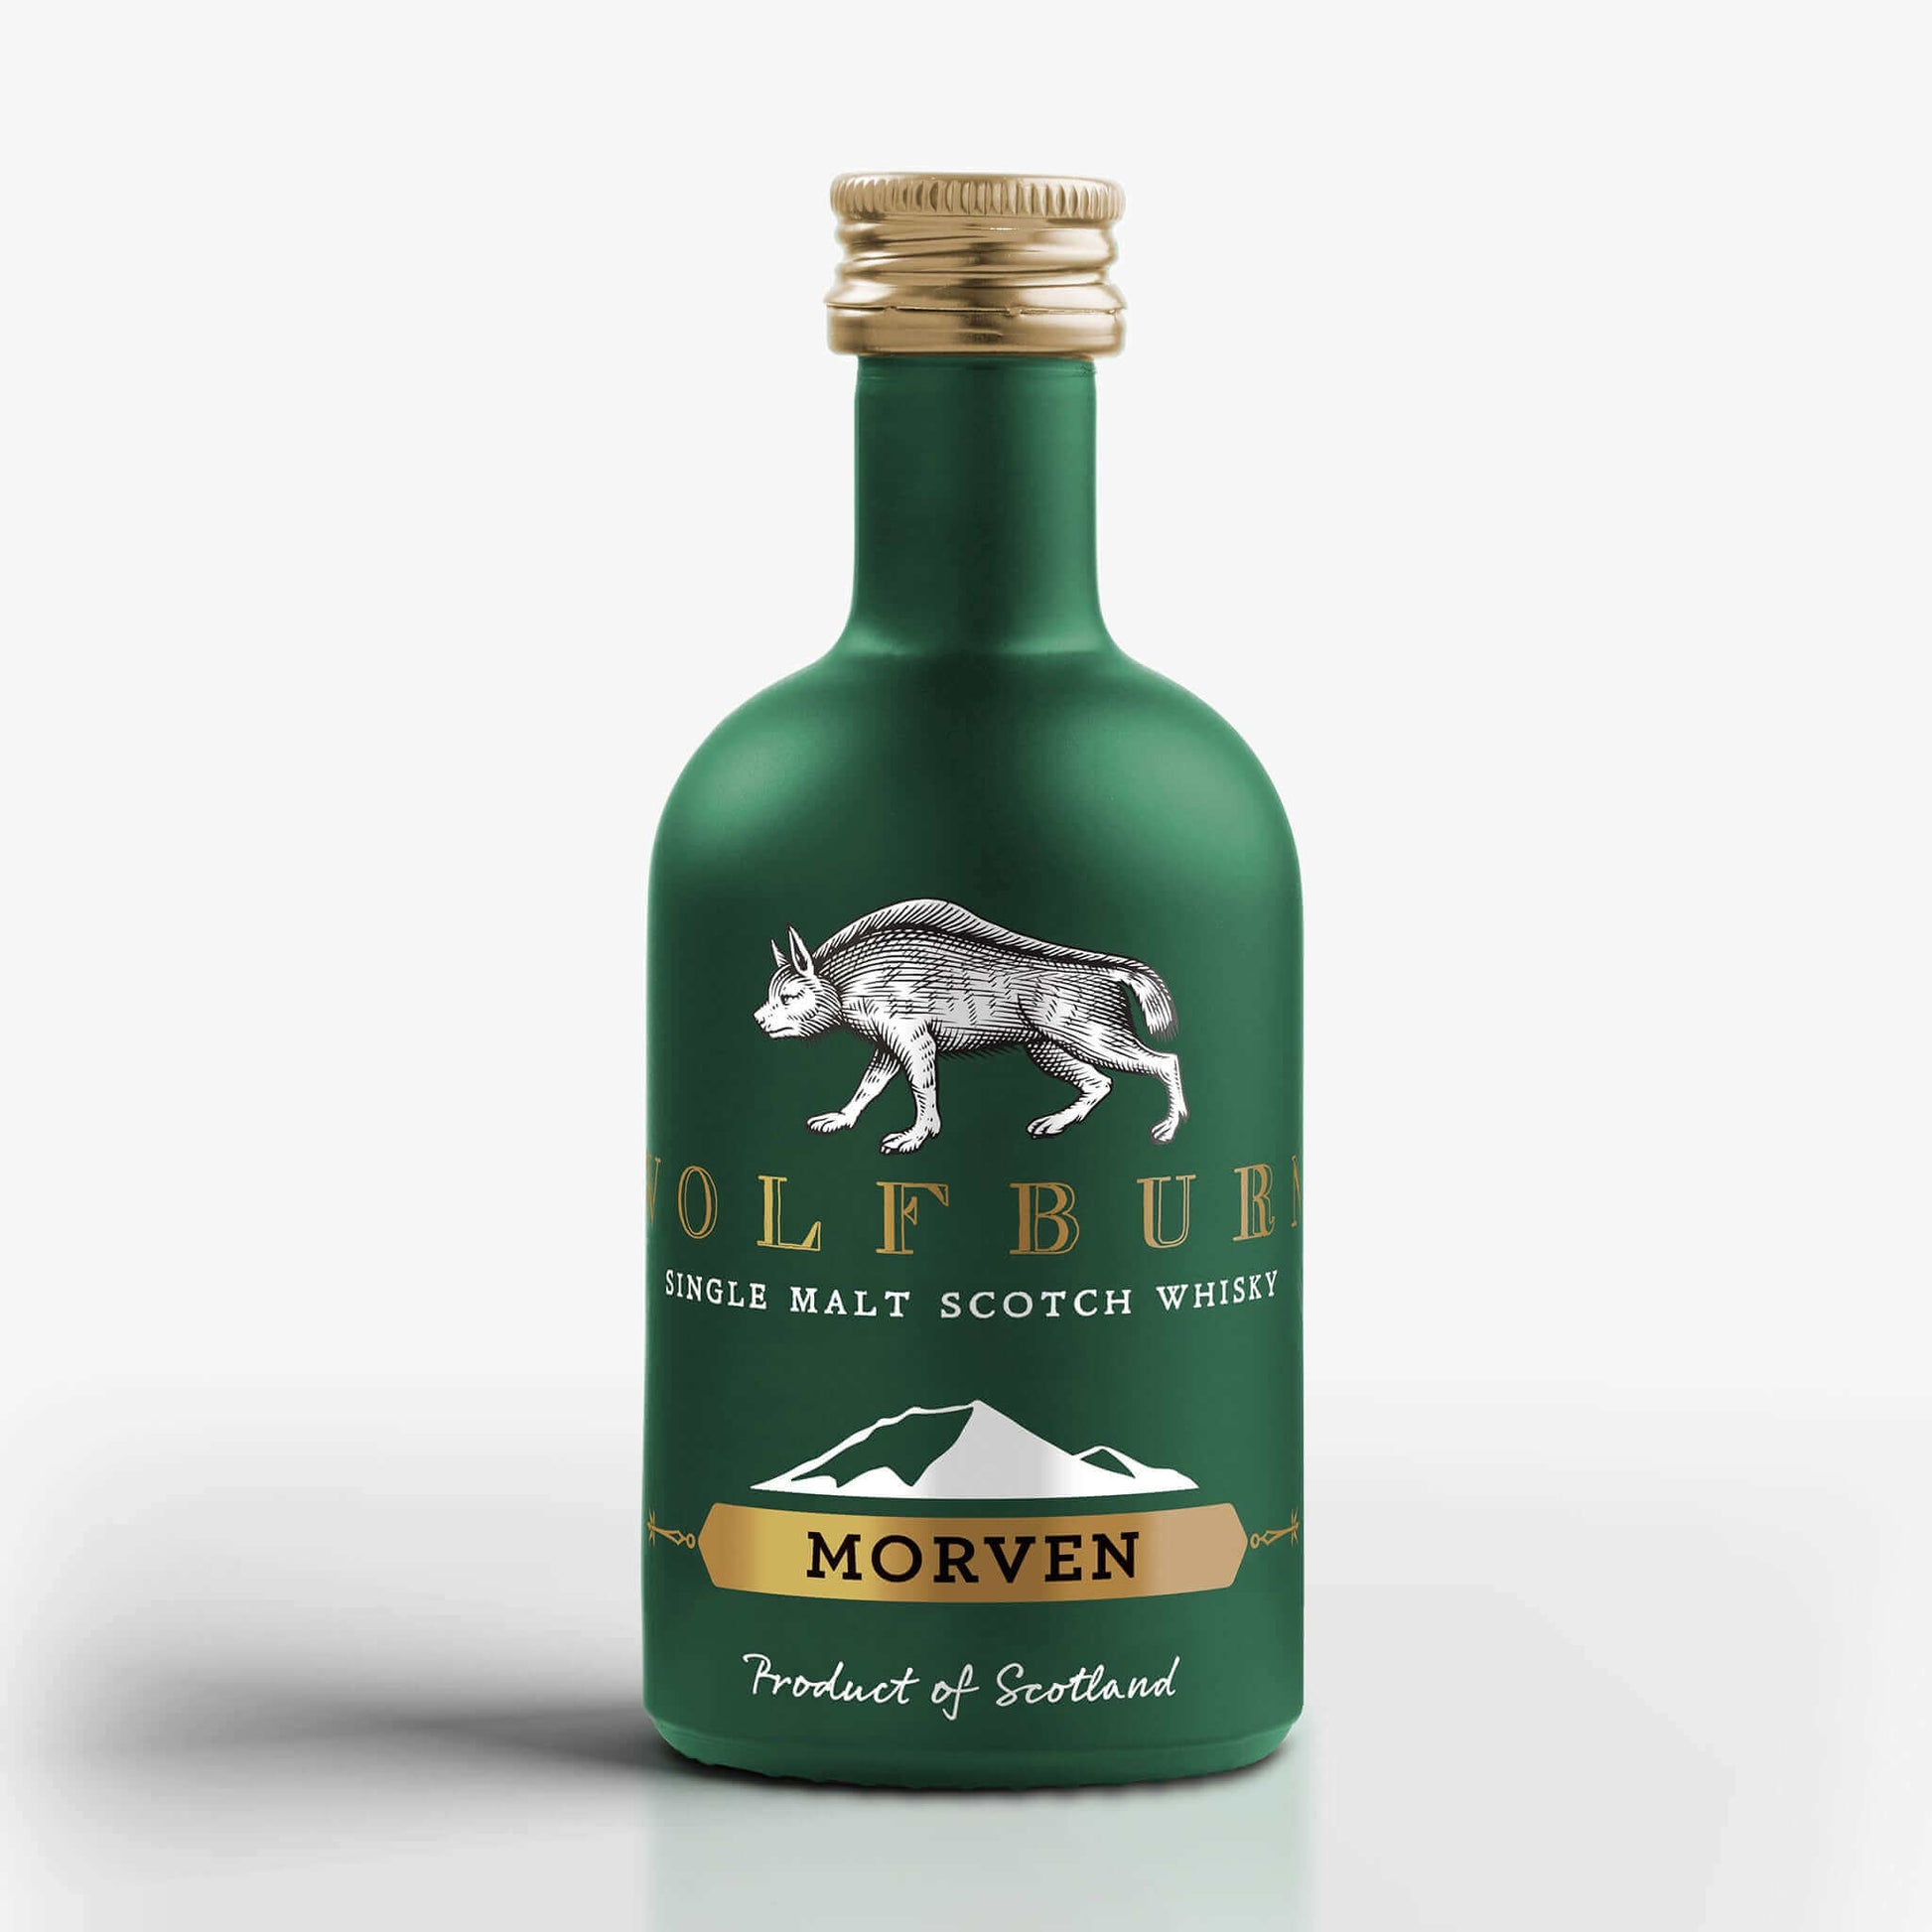 Wolfburn Morven Miniature – 46% vol. 5cl A miniature bottle of Aurora with the same familiar taste and quality as its big brother, just even easier to carry on the move. This lightly peated whisky is made from malted barley infused with smoke during the d